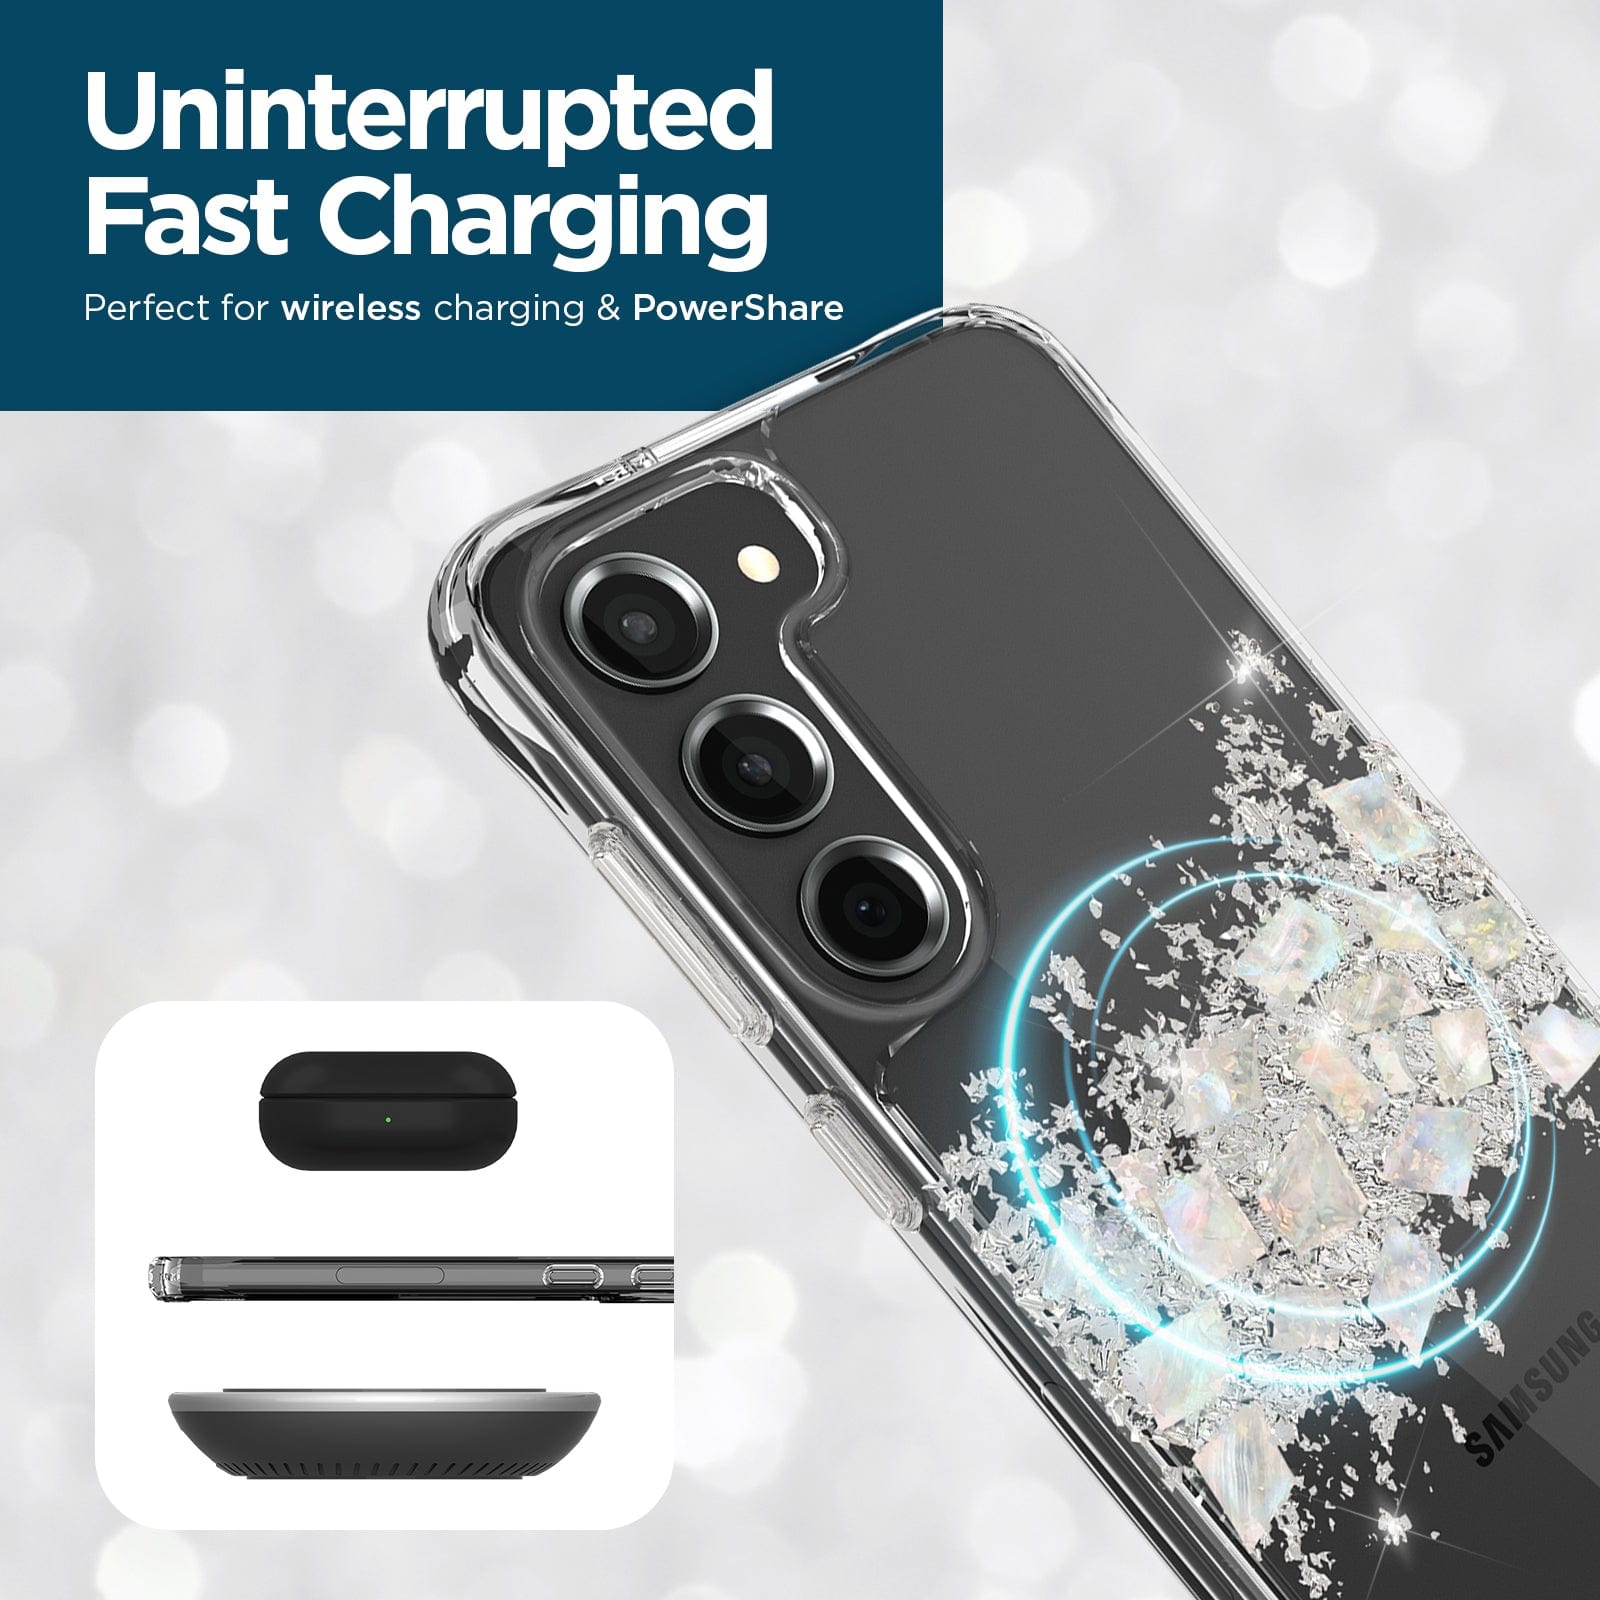 UNINTERRUPTED FAST CHARGING. PERFECT FOR WIRELESS CHARGING & POWERSHARE. 